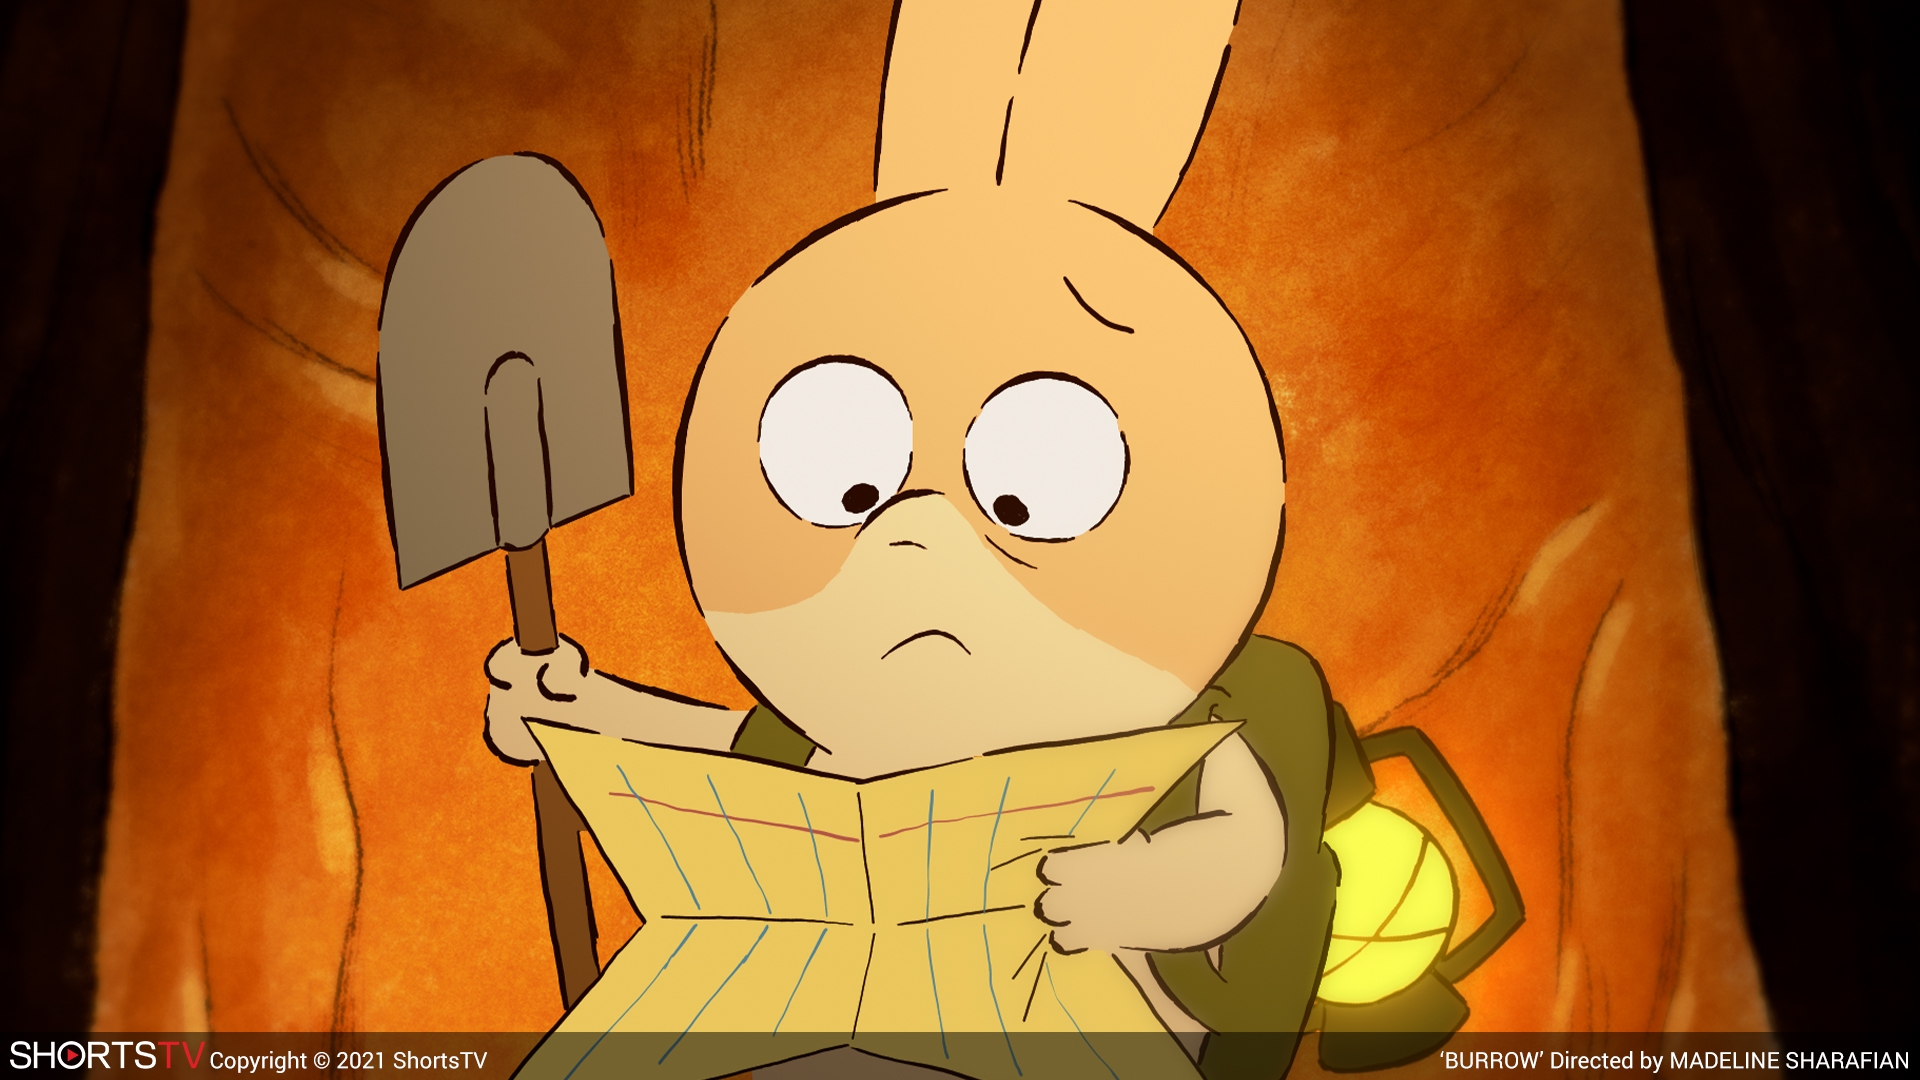 An animated rabbit holding a map and shovel from "Burrow"